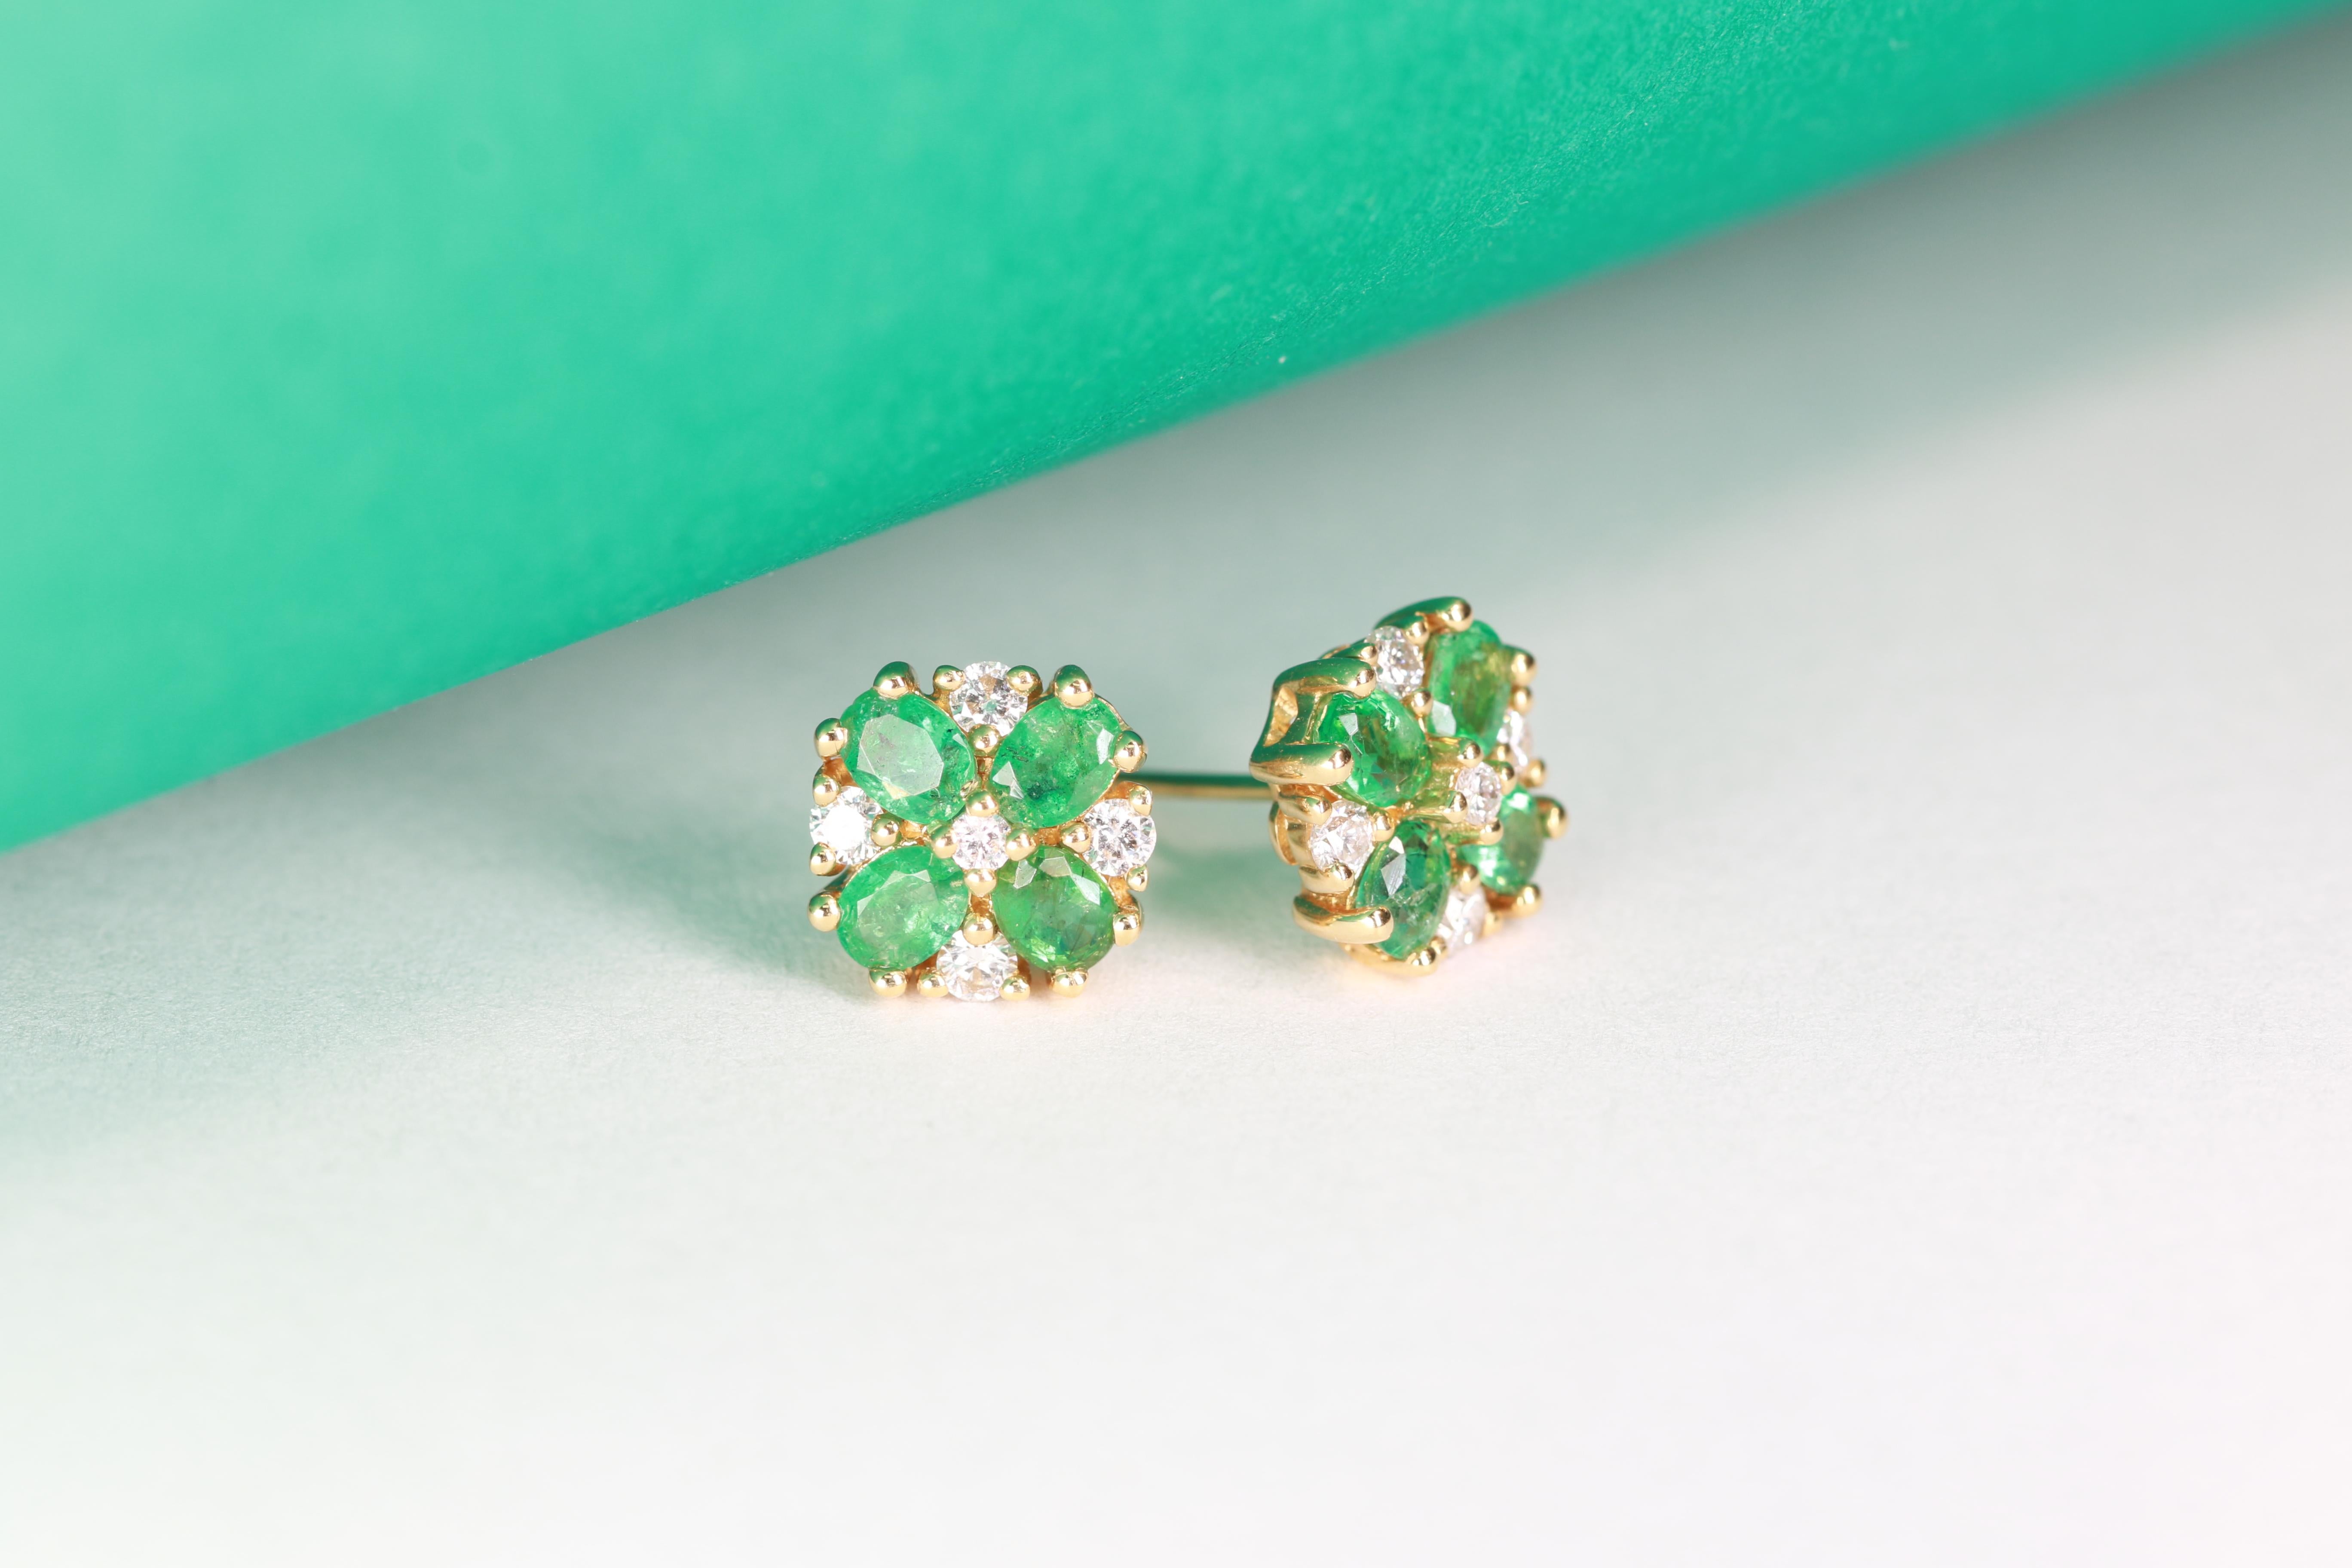 Decorate yourself in elegance with this Earring is crafted from 18-karat Yellow Gold by Gin & Grace. This Earring is made up of 3x4 mm Oval-Cut Zambian Emerald (8 pcs) 1.30 carat and Round-cut Diamond (10 pcs) 0.37 Carat. This Earring is weight 3.55